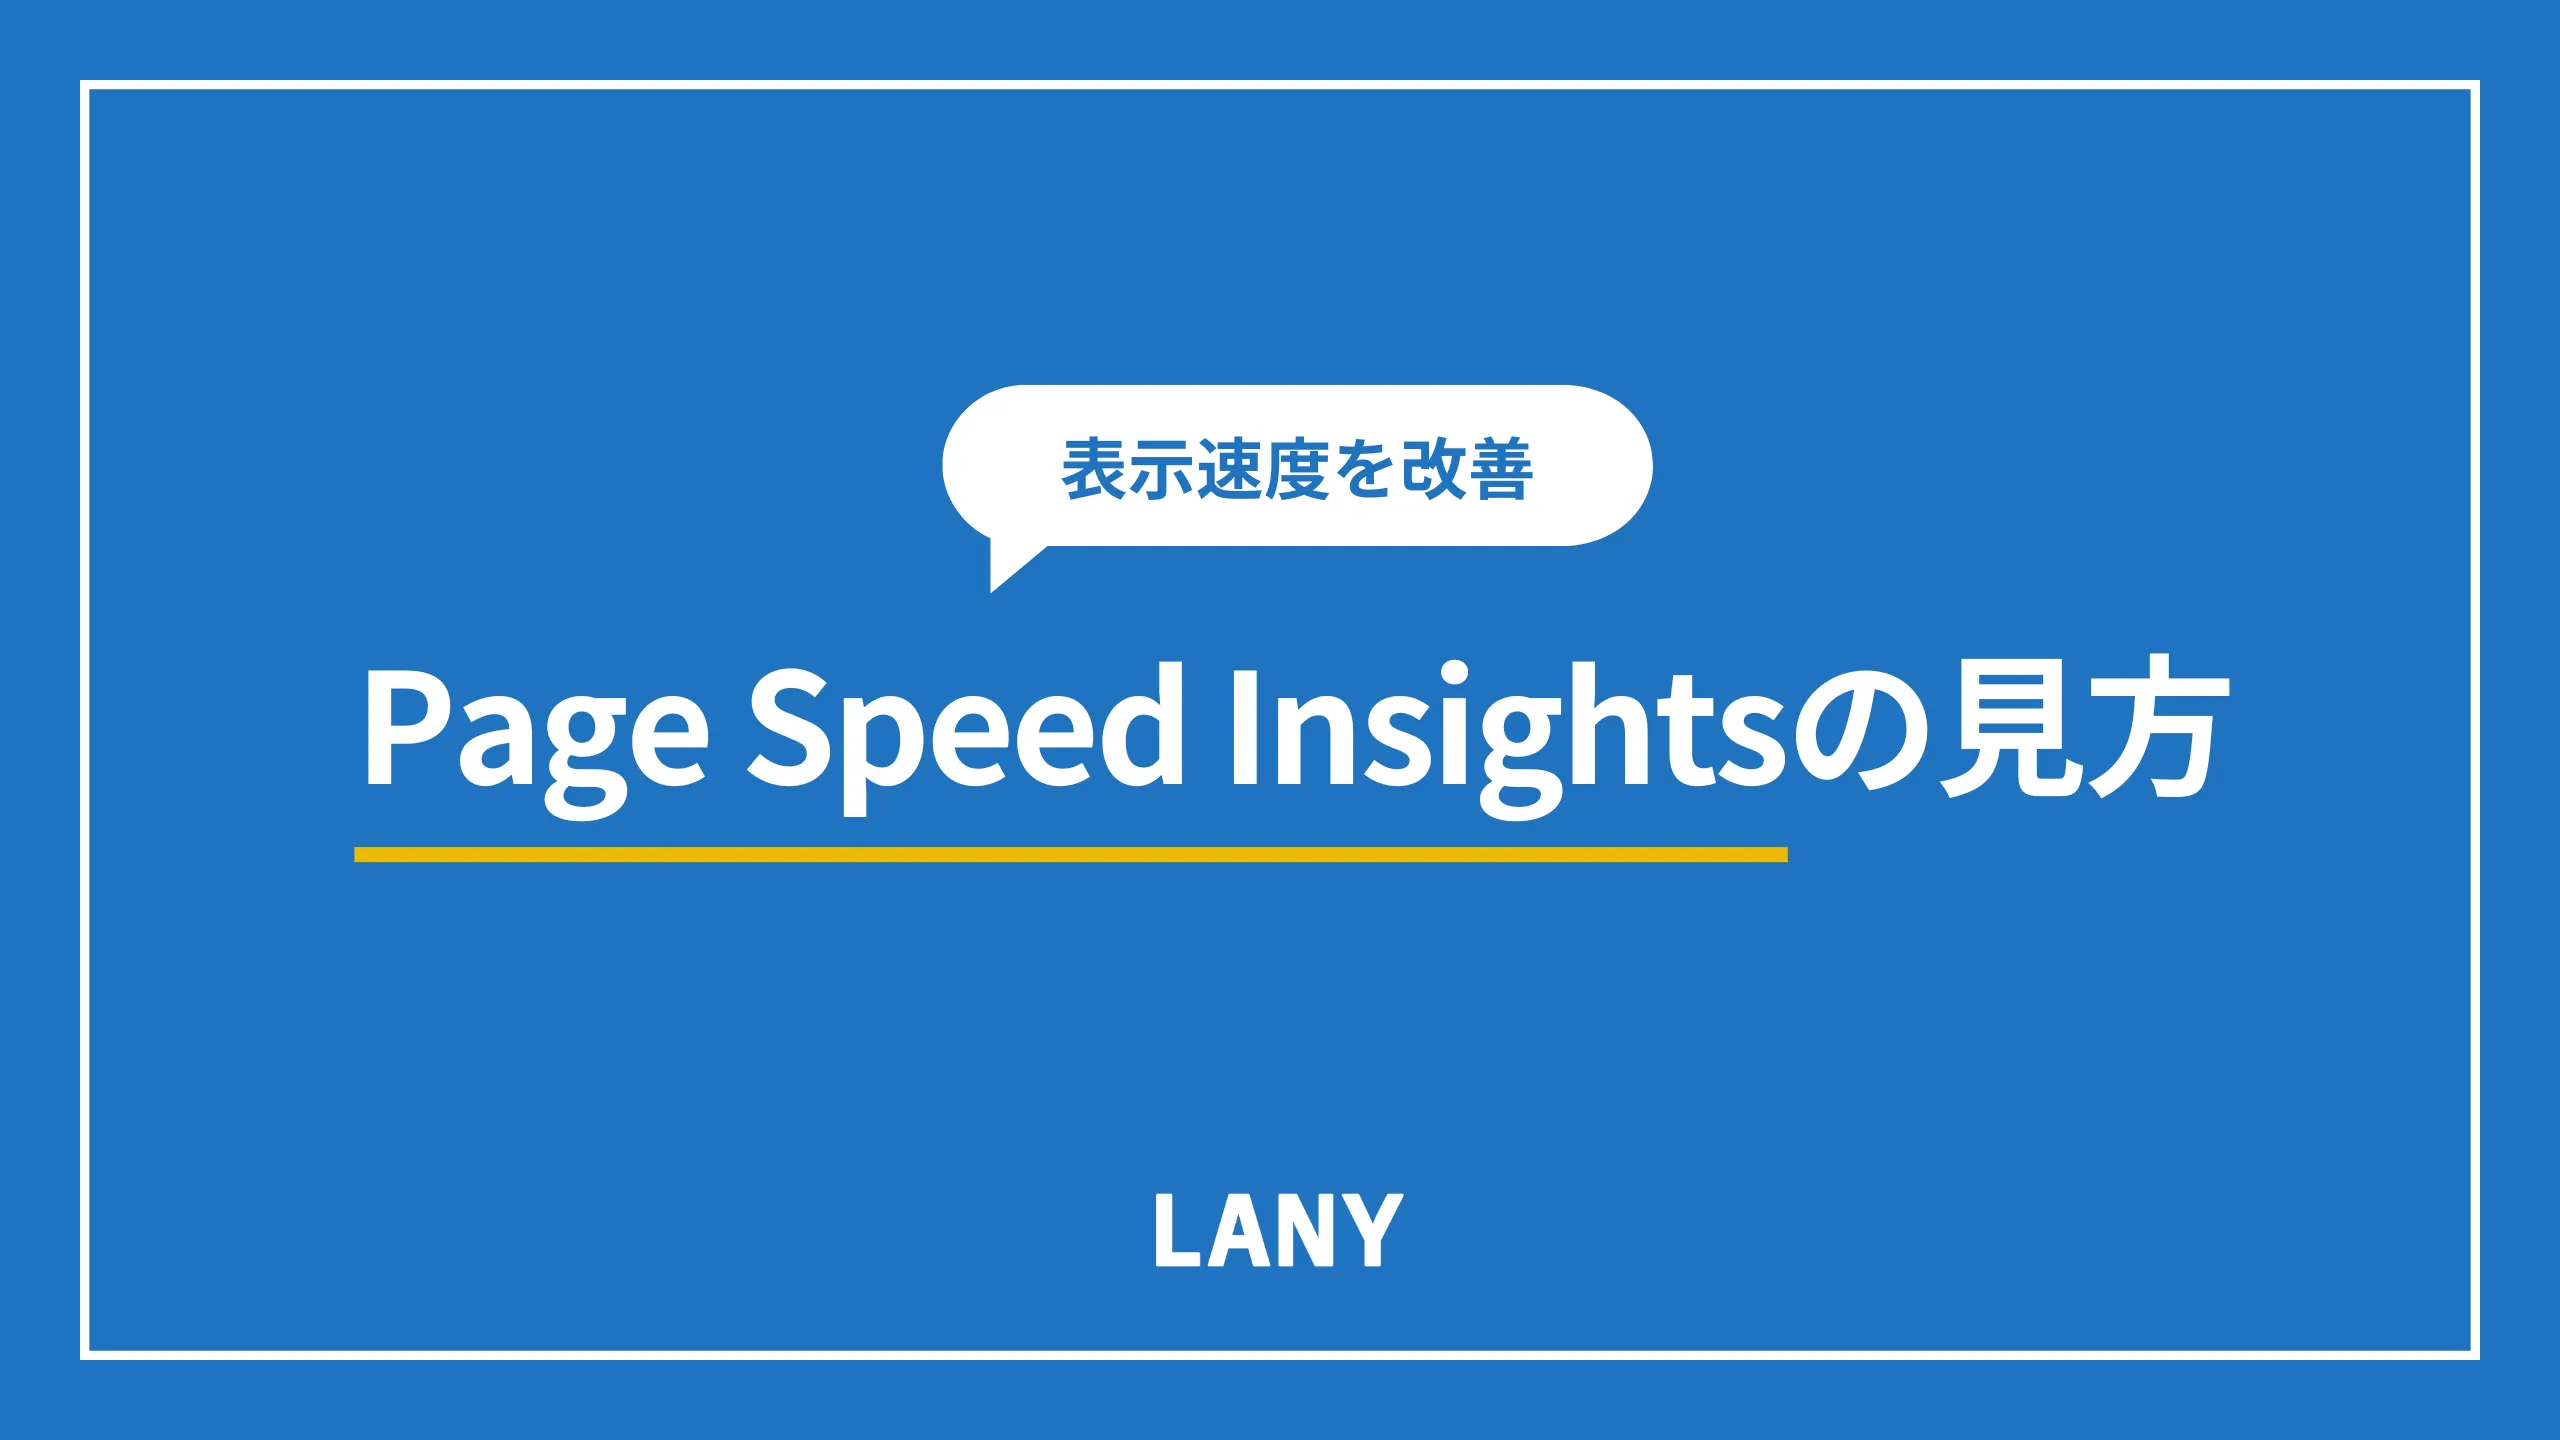 PageSpeed Insightsの見方は？サイト表示速度の改善方法を紹介